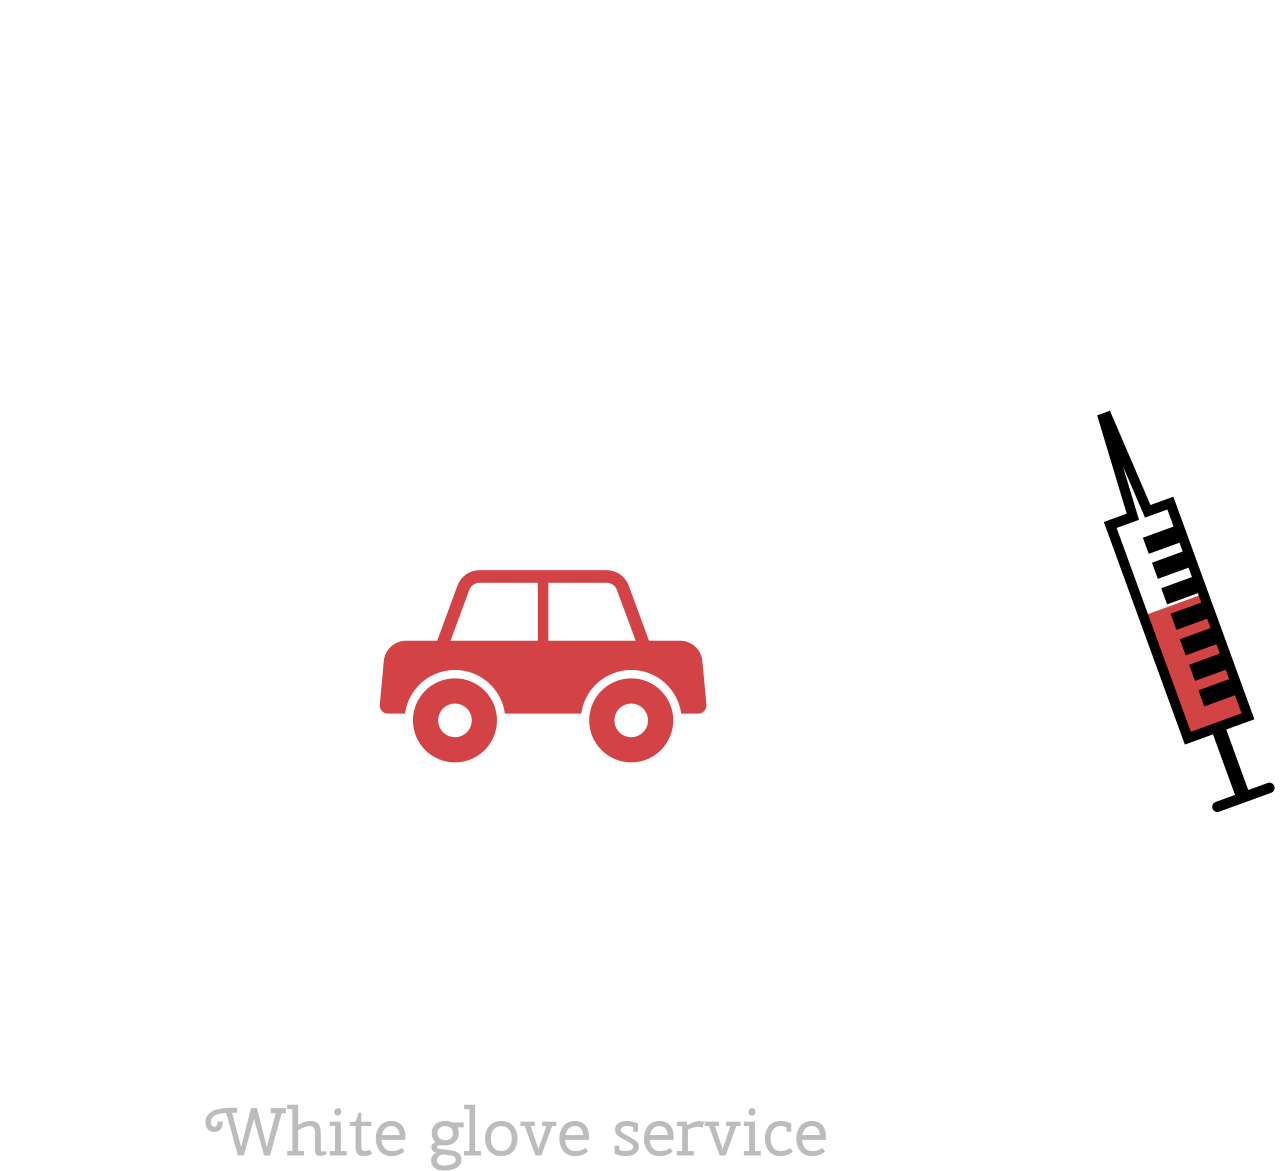  We Bring the lab to you!serving Camarillo Softtouch lab's web page